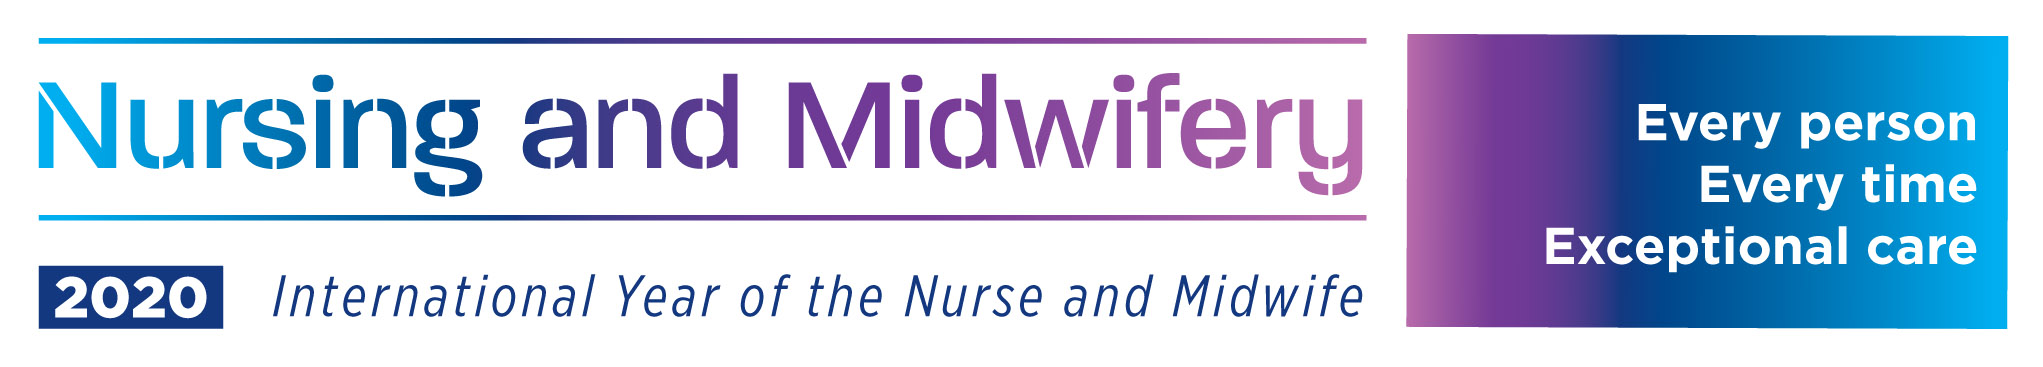 Nursing and Midwifery - International Year of the Nurse and the Midwife - Every person. Every time. Exceptional care.